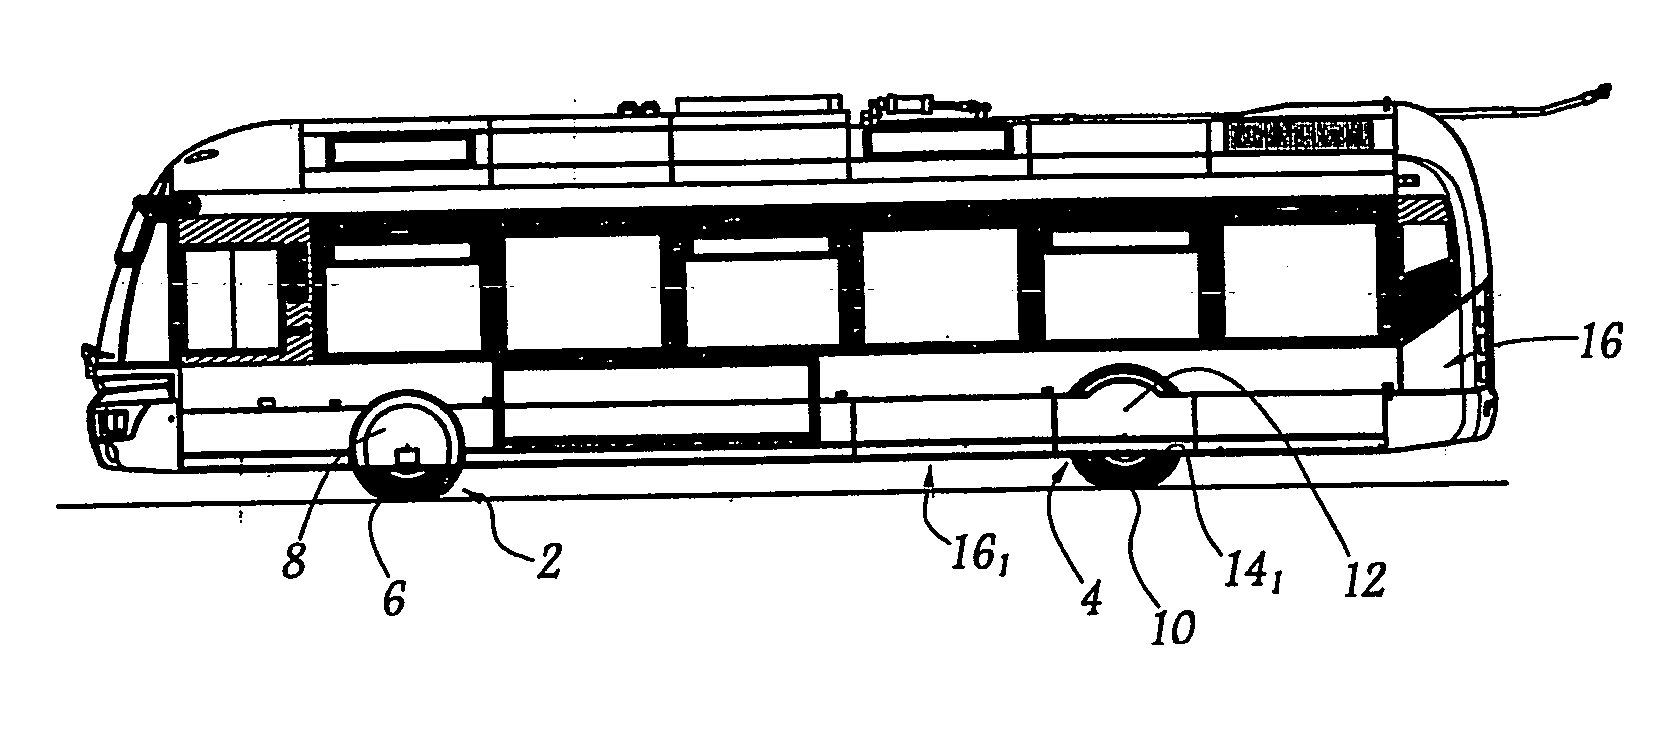 Fairing for wheel of heavy goods vehicle, and the corresponding heavy goods vehicle